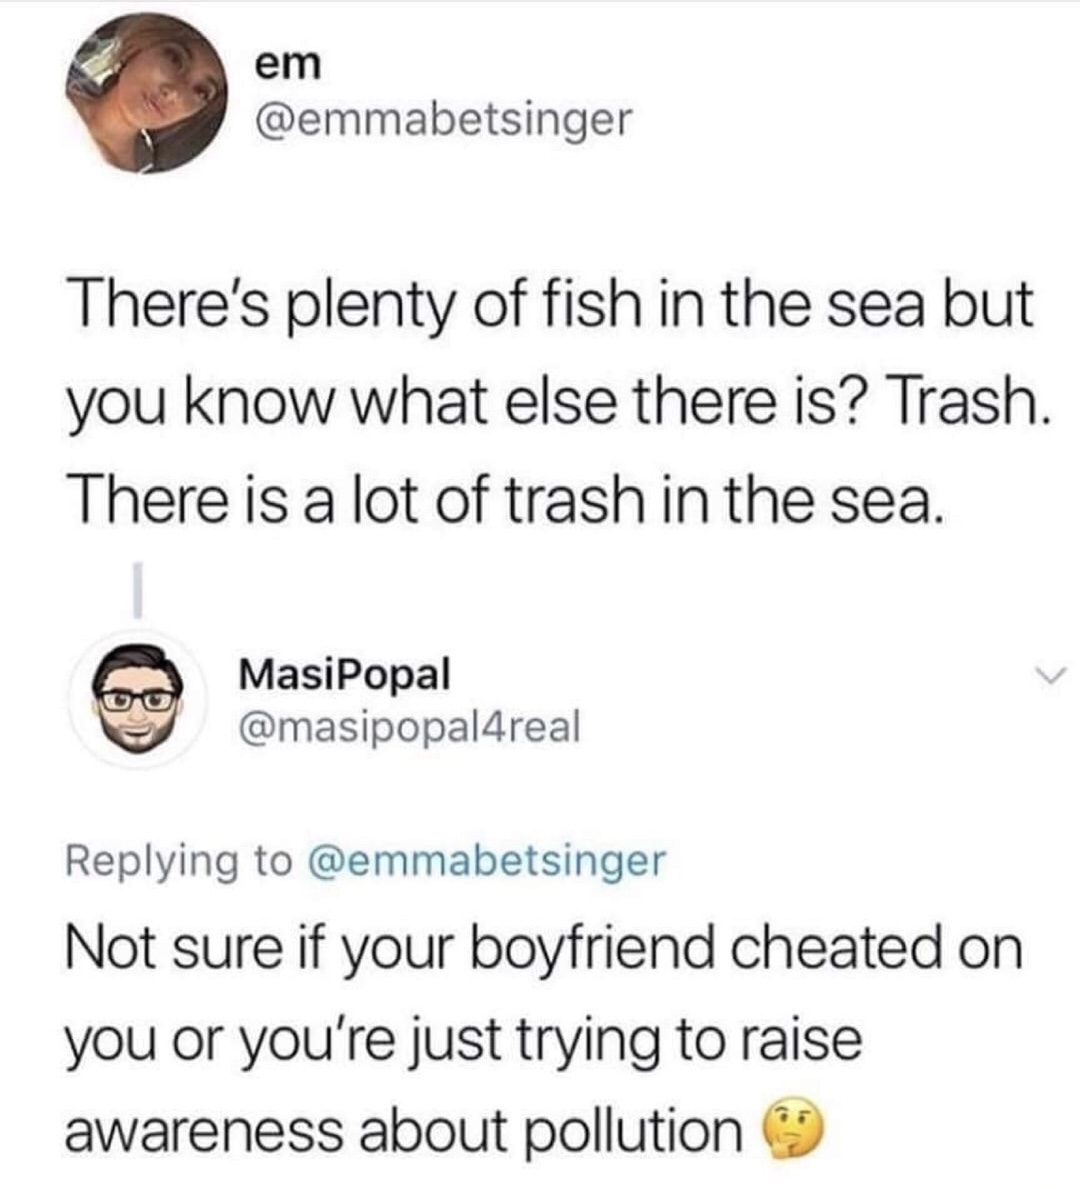 usps tracking meme - em There's plenty of fish in the sea but you know what else there is? Trash. There is a lot of trash in the sea. Masipopal Not sure if your boyfriend cheated on you or you're just trying to raise awareness about pollution 9